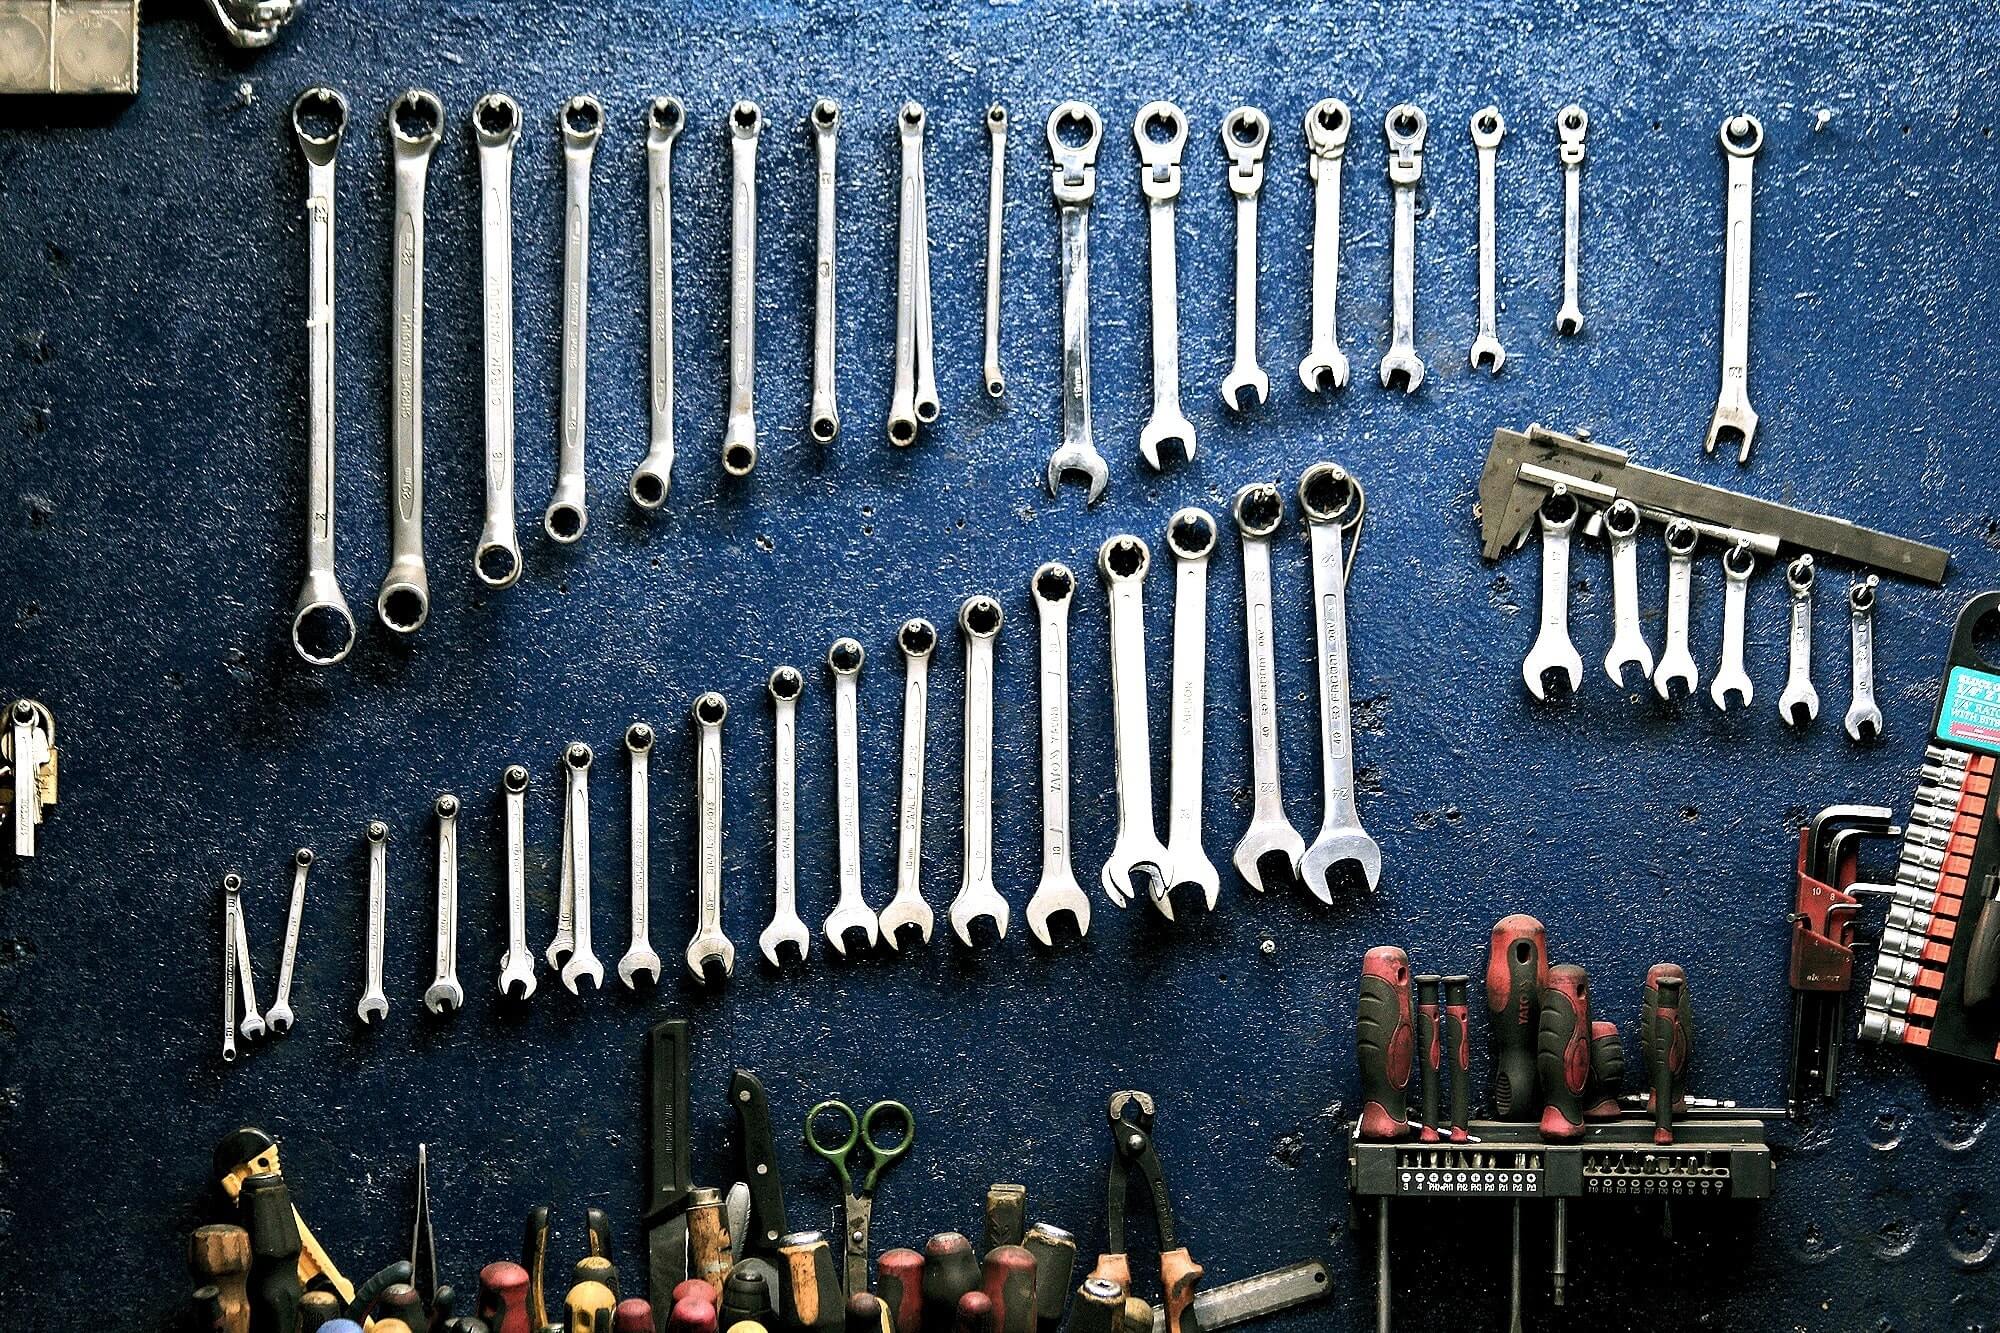 https://studyfinds.org/wp-content/uploads/2023/02/Set-of-tools-hanging-on-wall.jpg